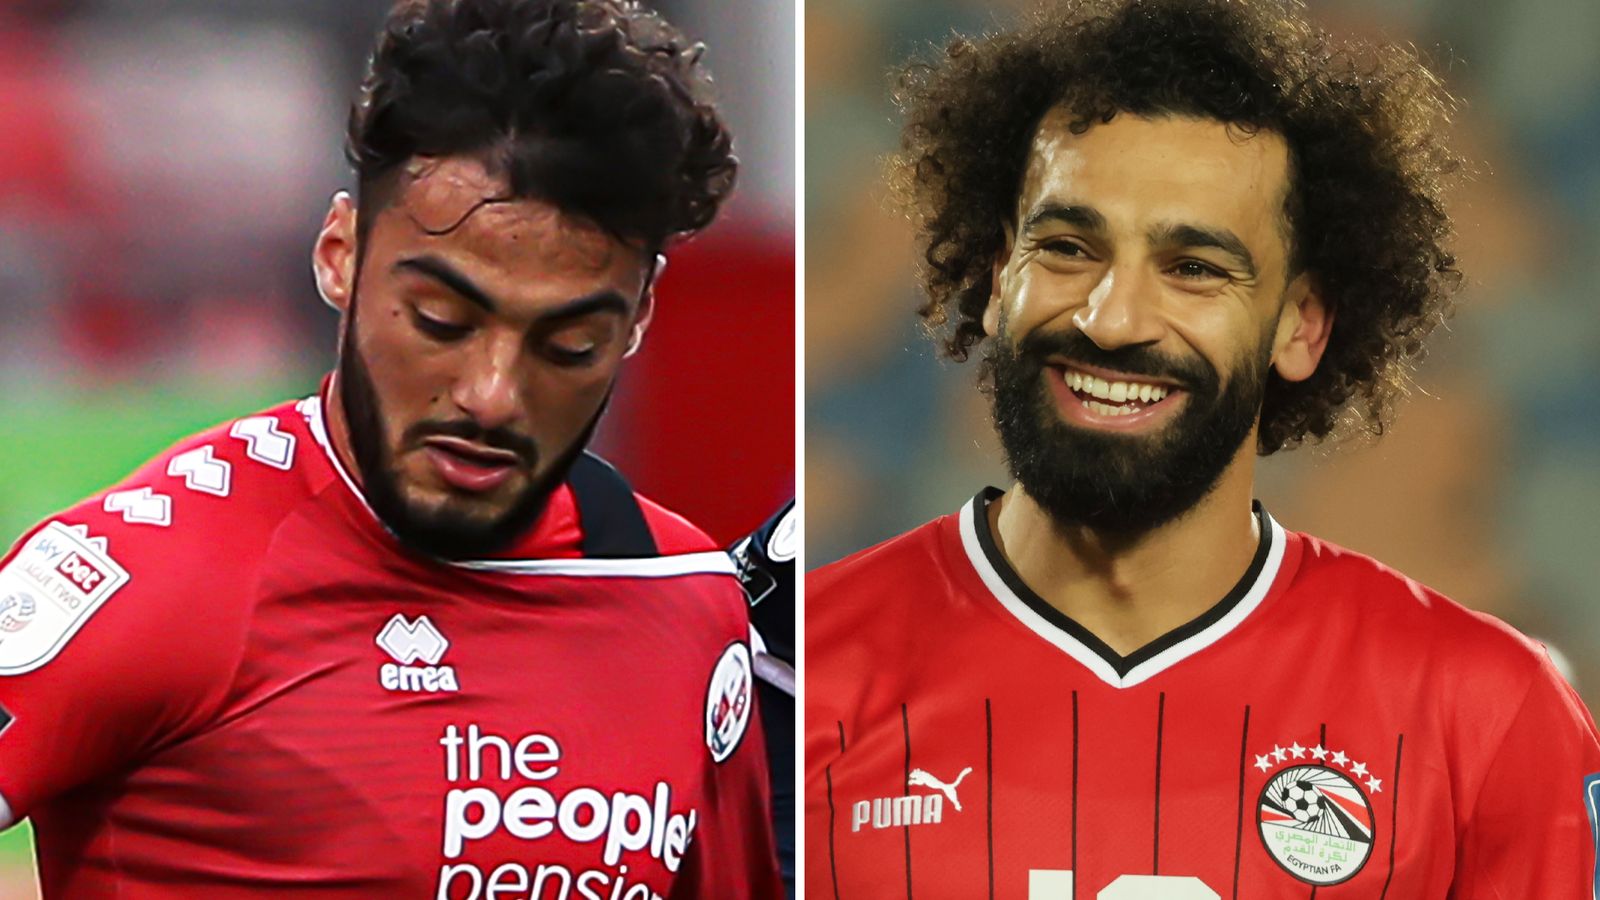 Tarryn Allarakhia, pictured during his time with Crawley Town, and Egypt's Mohamed Salah